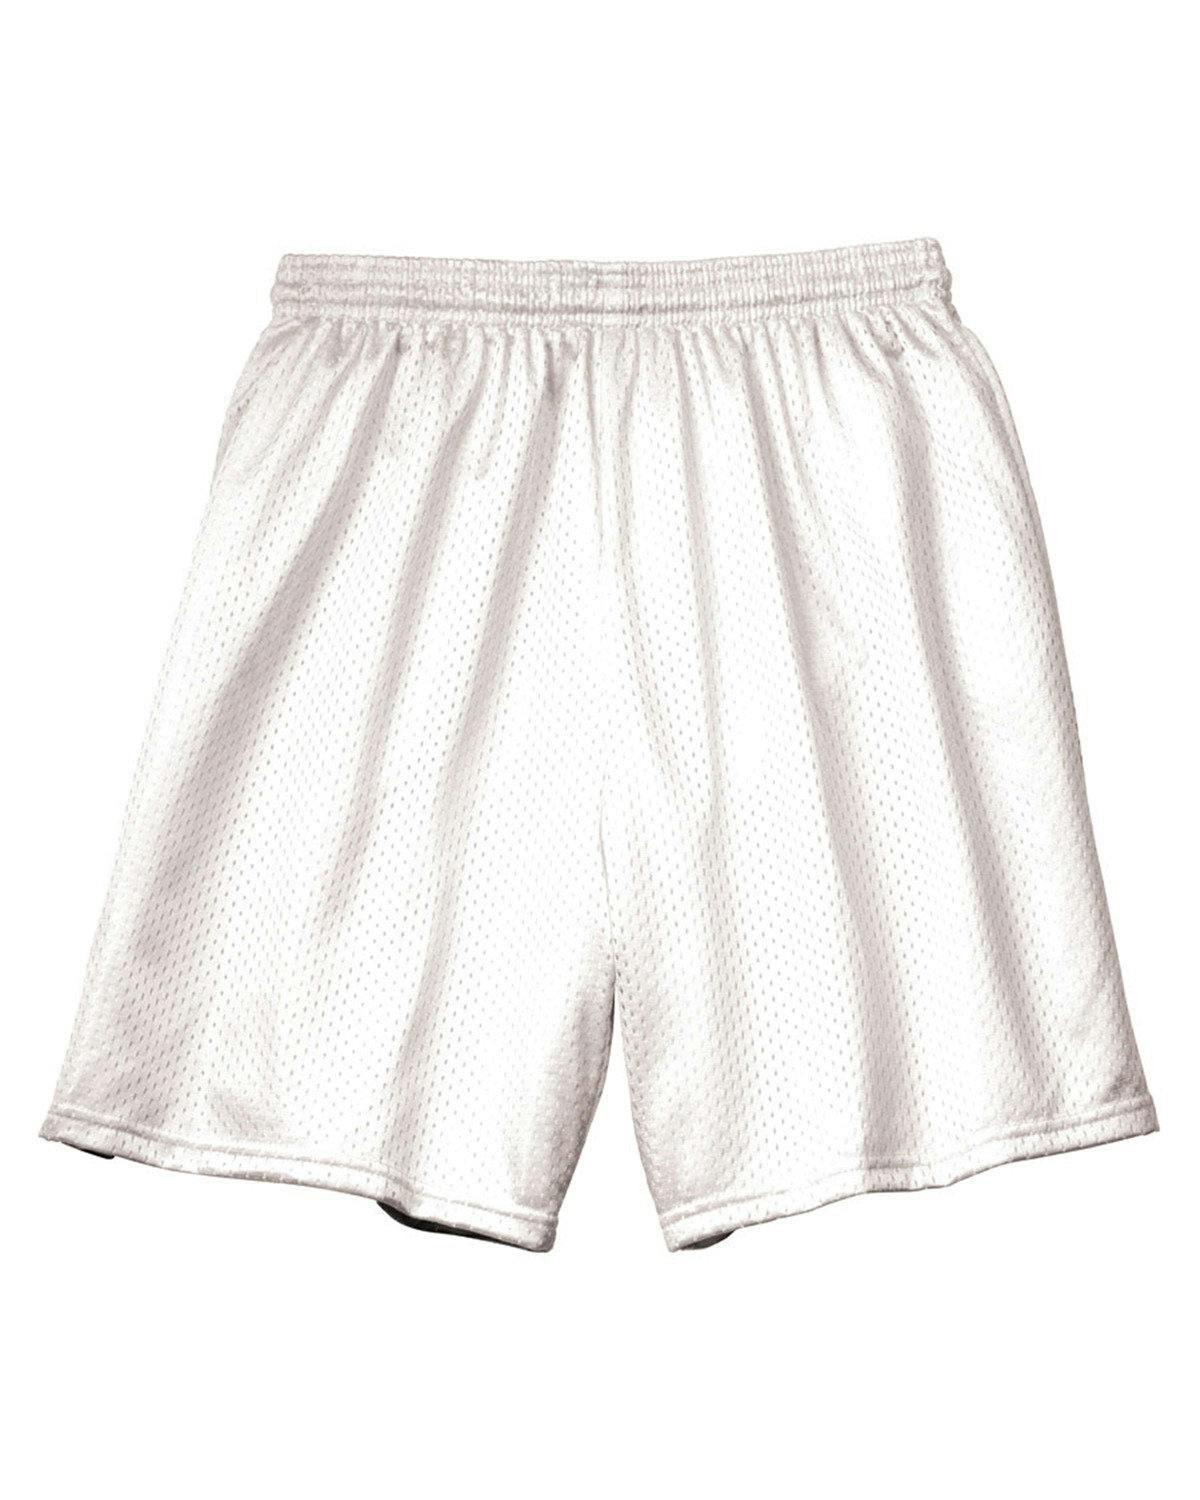 Image for Adult Seven Inch Inseam Mesh Short